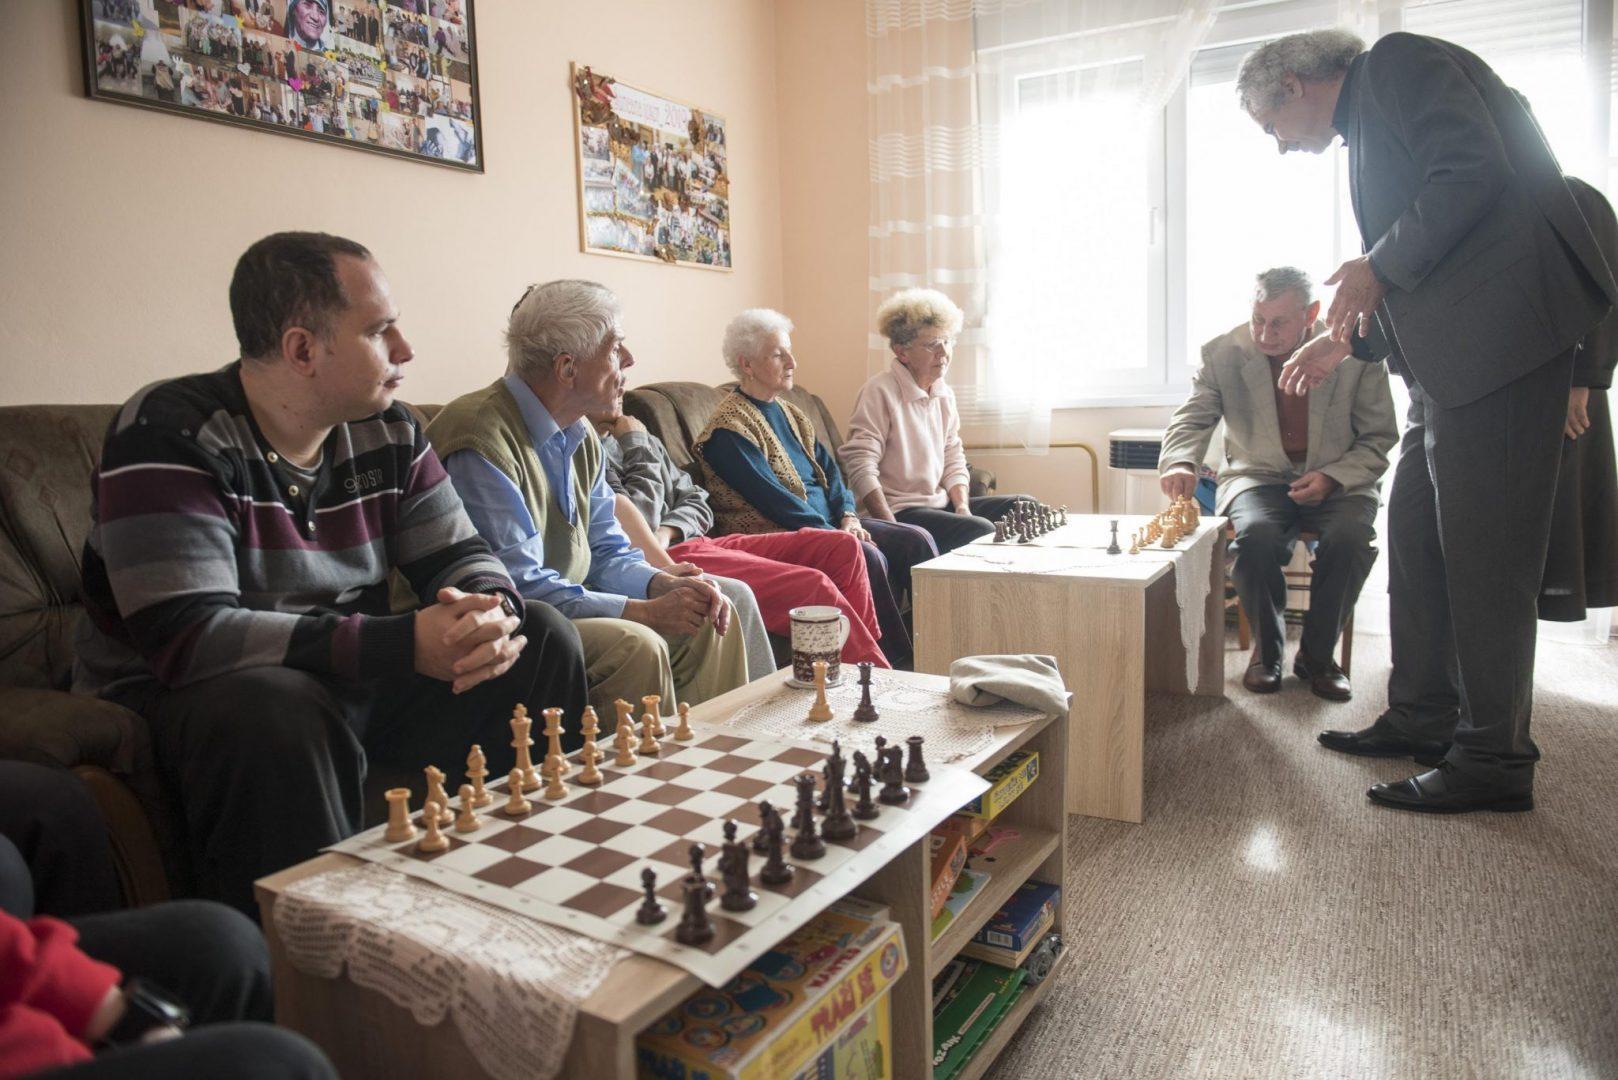 A small step in chess, a big step for inclusion